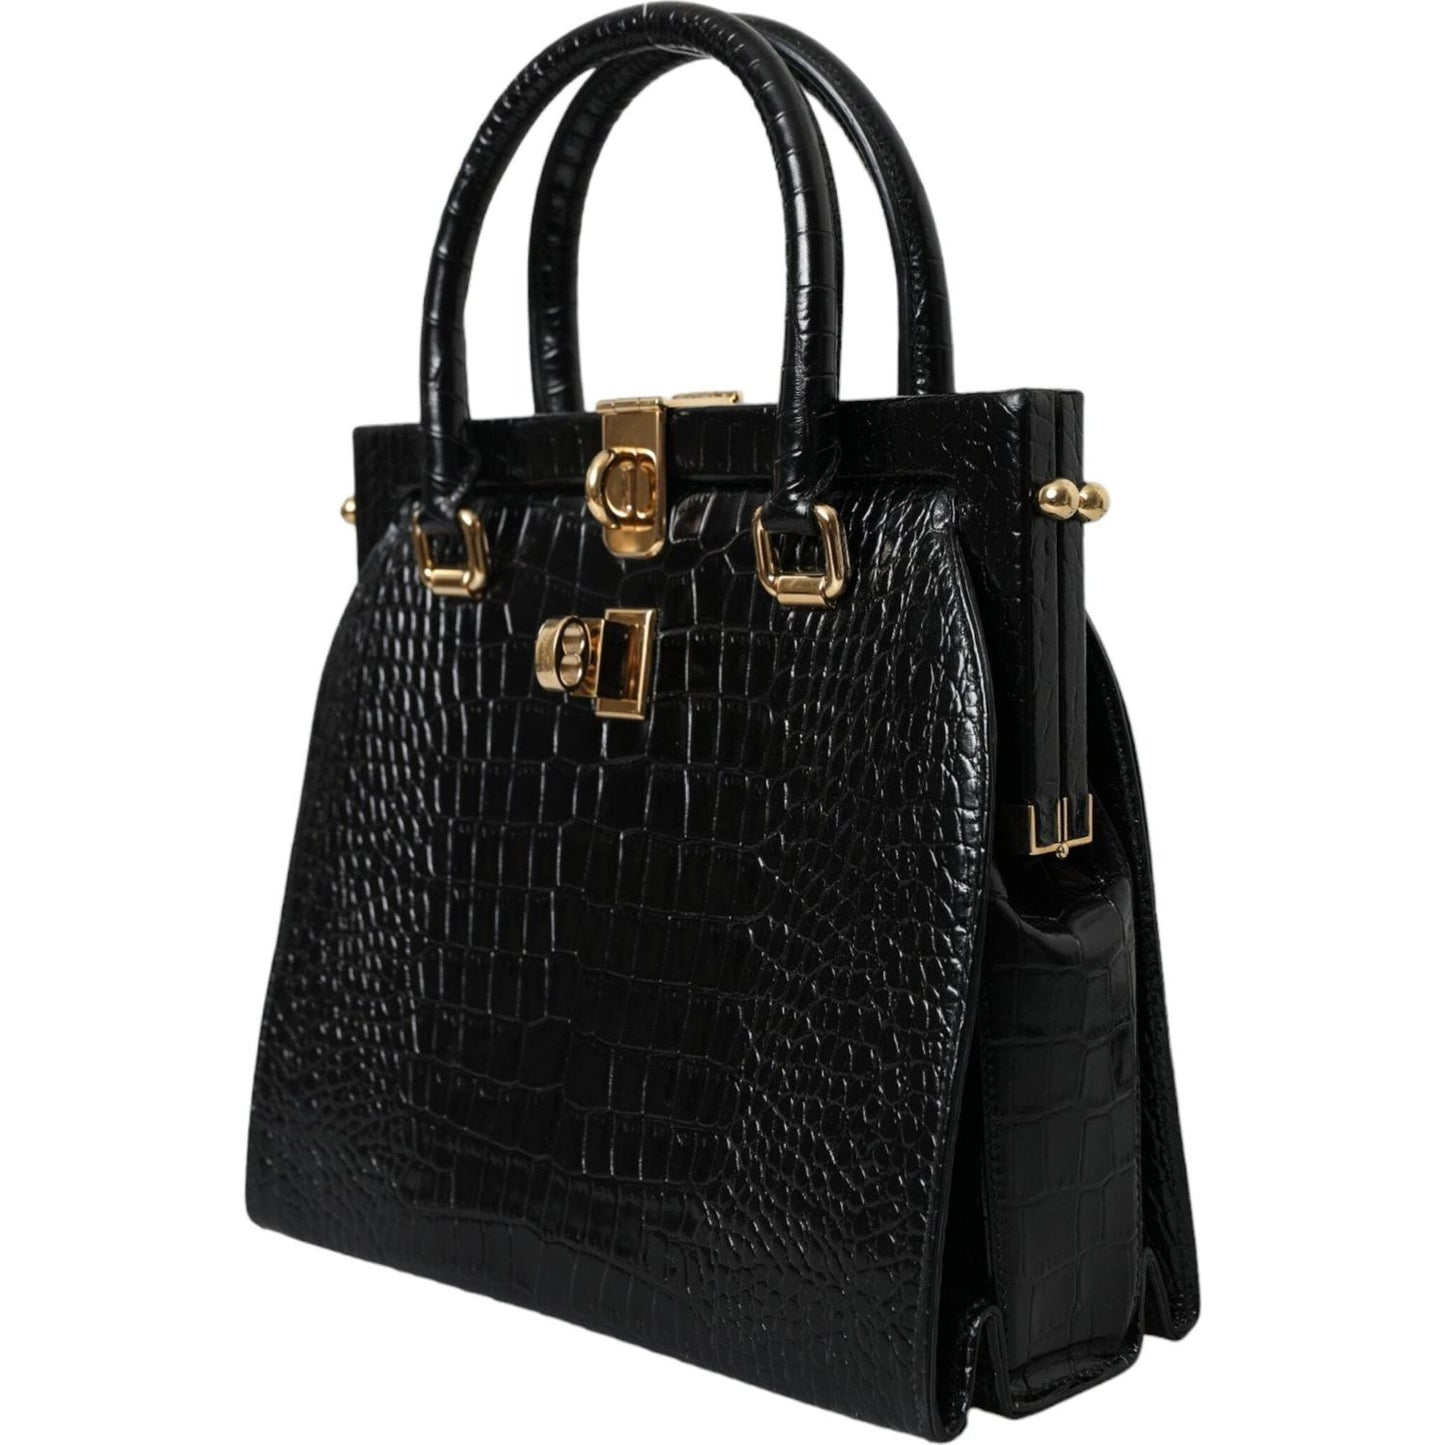 Black Exotic Leather Top Handle Tote Women Bag